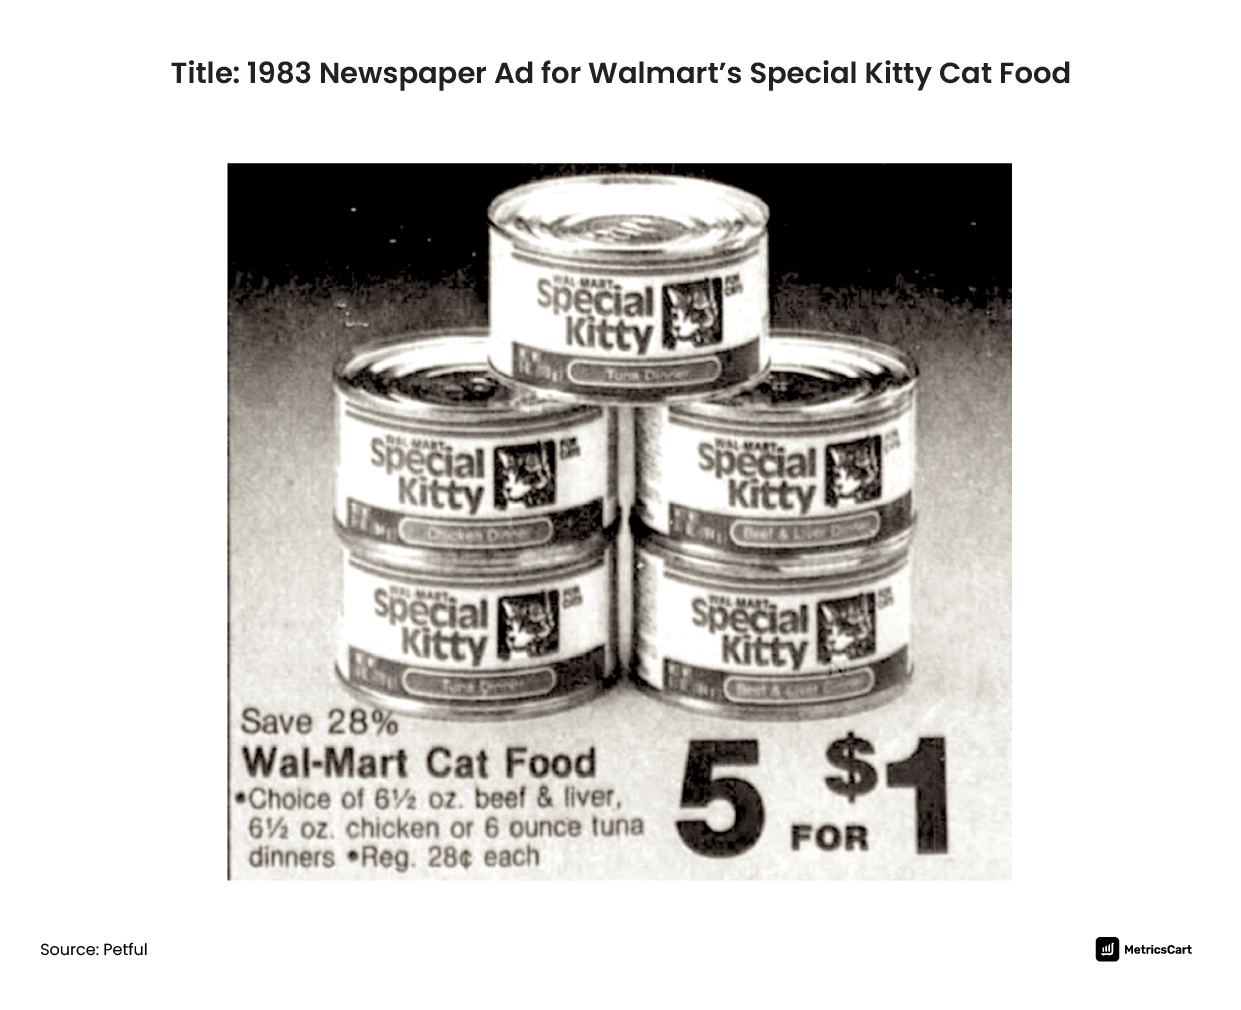 Walmart Private Label Brand for Cats - Special Kitty